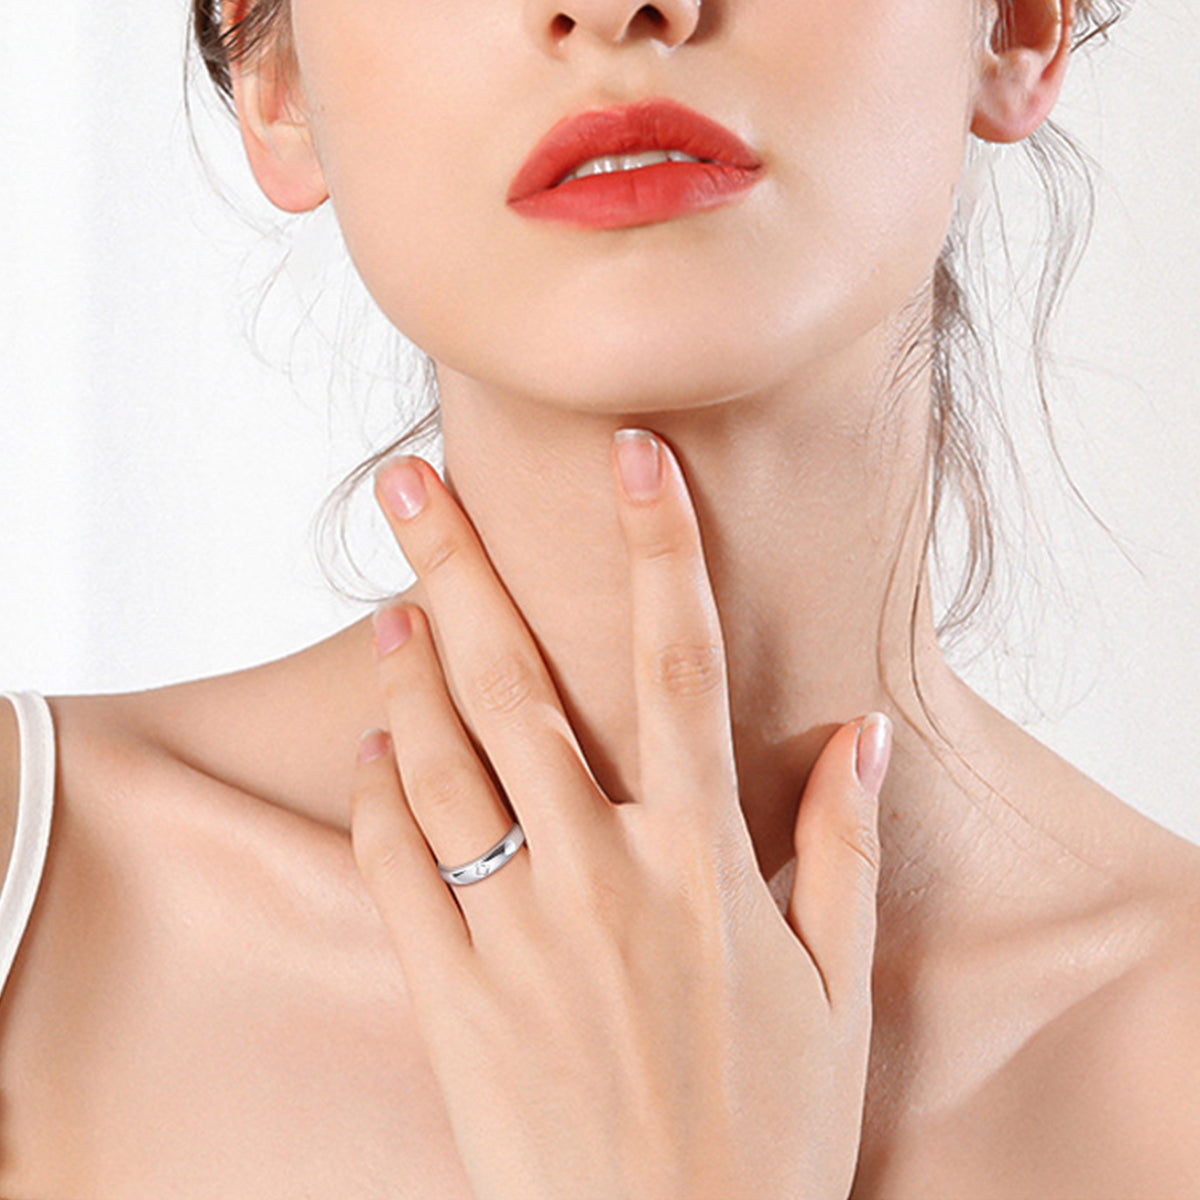 A close-up of a person with shoulder-length hair, wearing the 925 Sterling Silver Inlaid Moissanite Band Ring from Marianela's Exclusive Shop, LLC on the middle finger of their left hand. They have light skin, red lipstick, and are touching their neck with their left hand. The background is neutral.